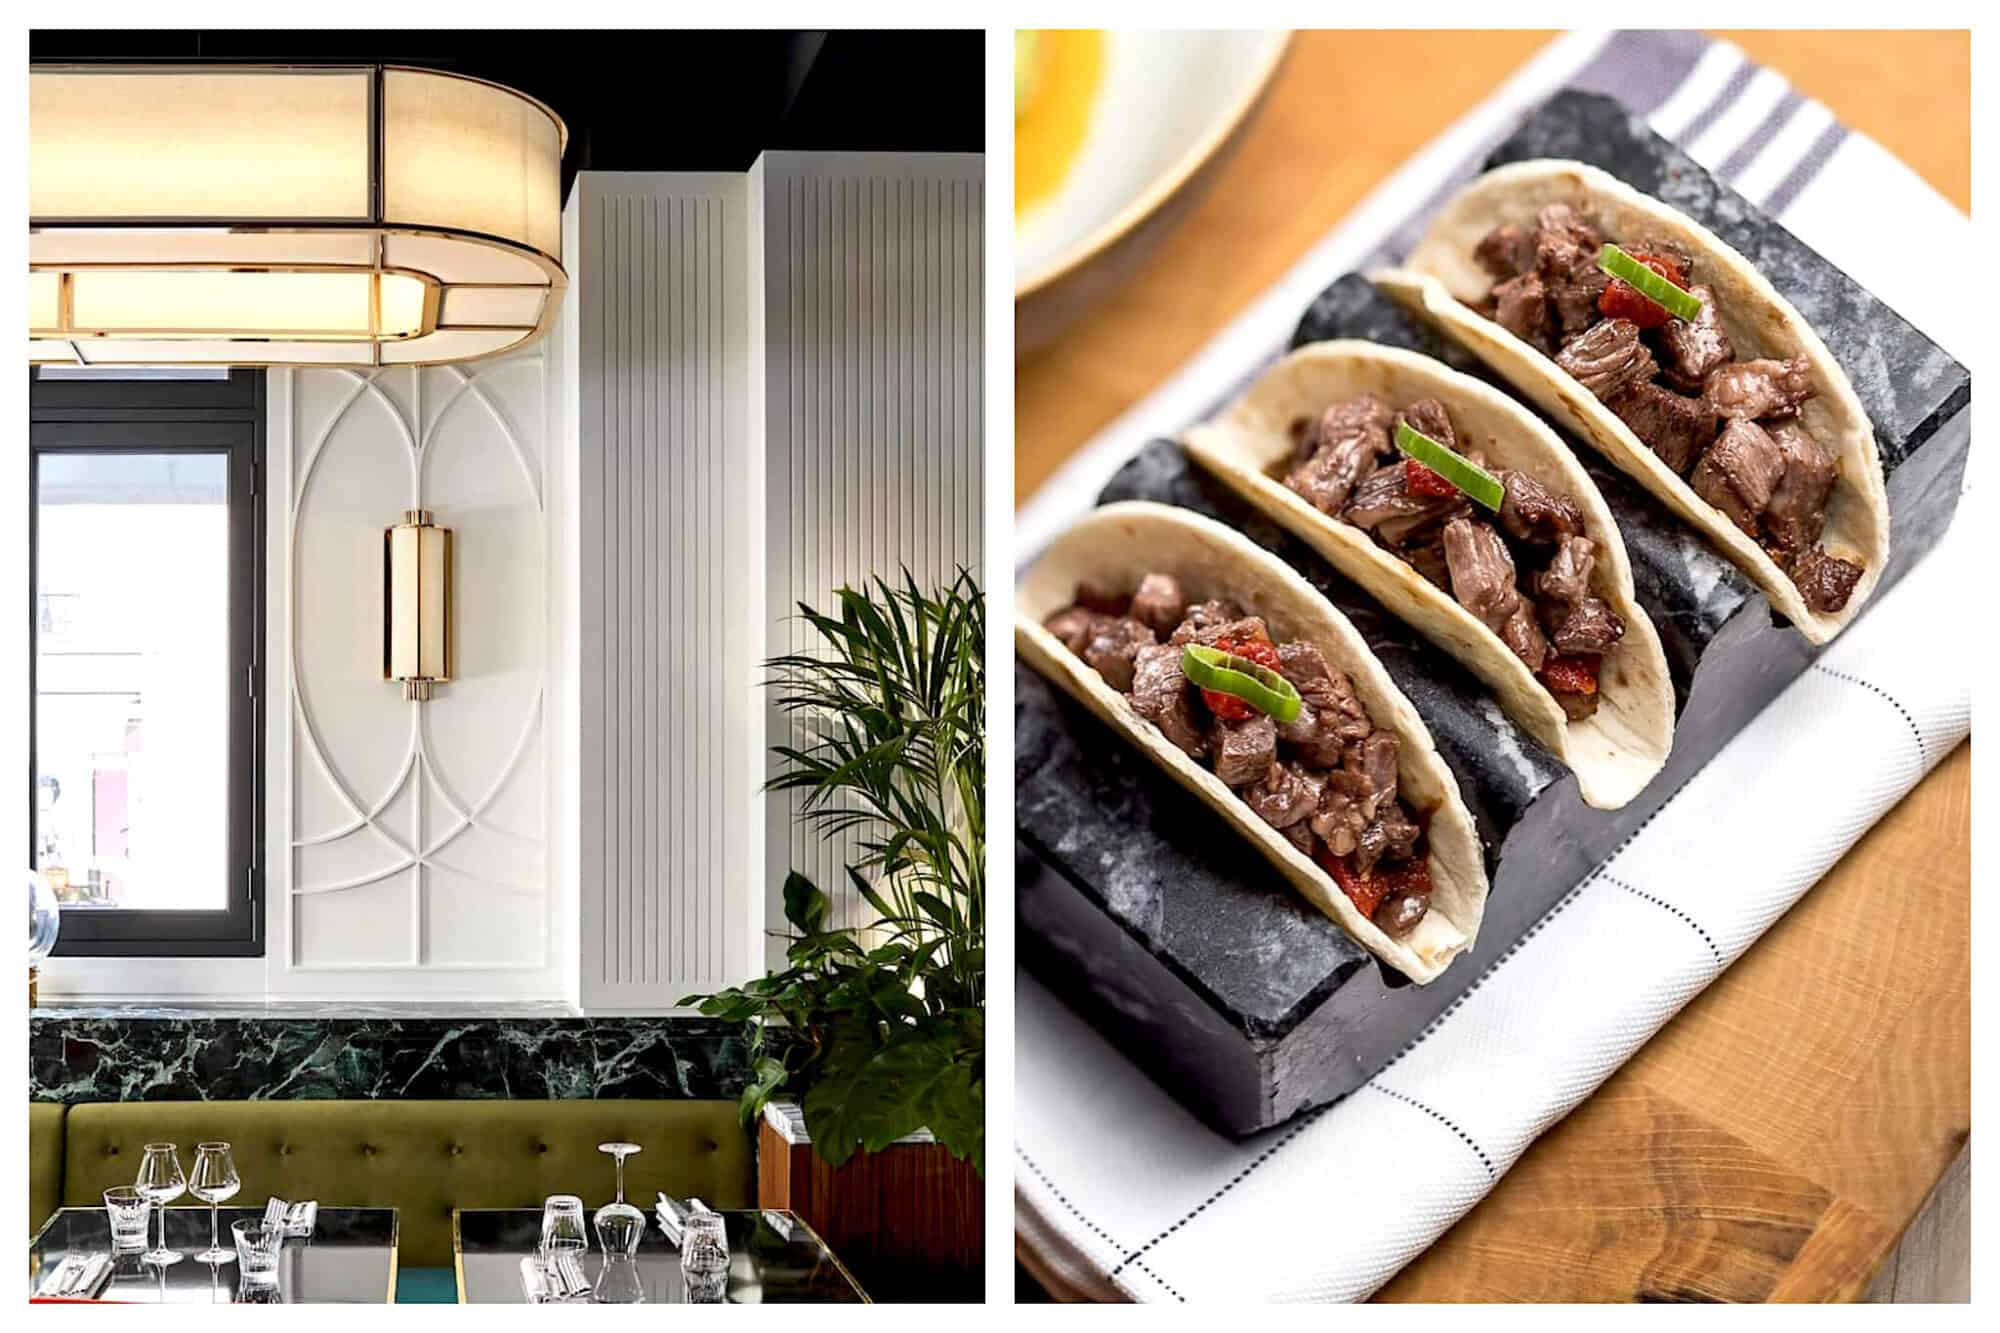 Left: The inside of Beefbar restaurant near the Champs Elysées in Paris. The interior has white walls, large green booth seating, modern lights and green plants, Right: Three beef tacos at Beefbar in Paris sit on a slab of marble